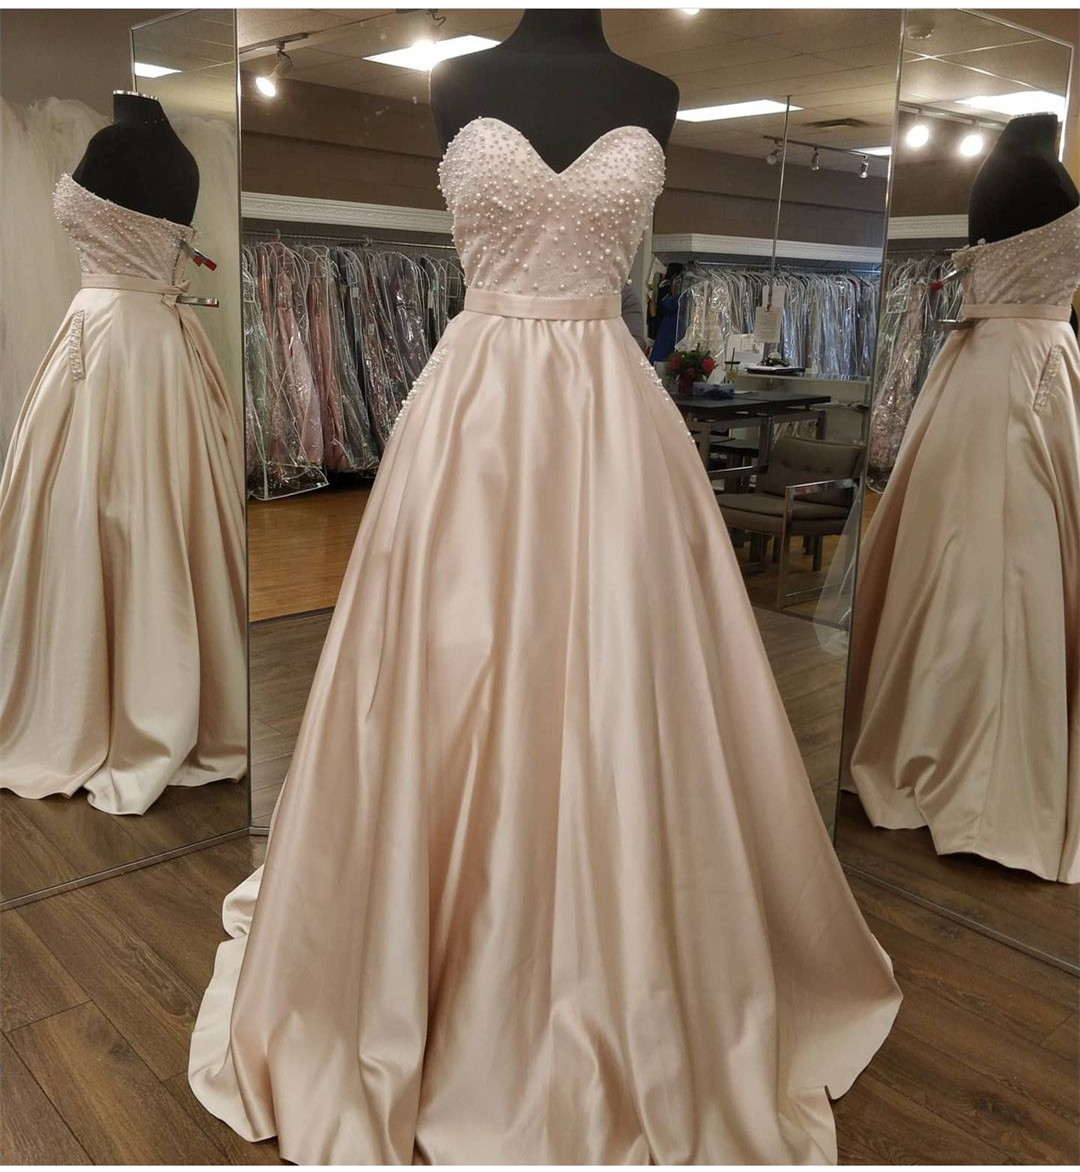 Sweetheart Neck Satin Prom Dresses Evening Gowns With Pearls